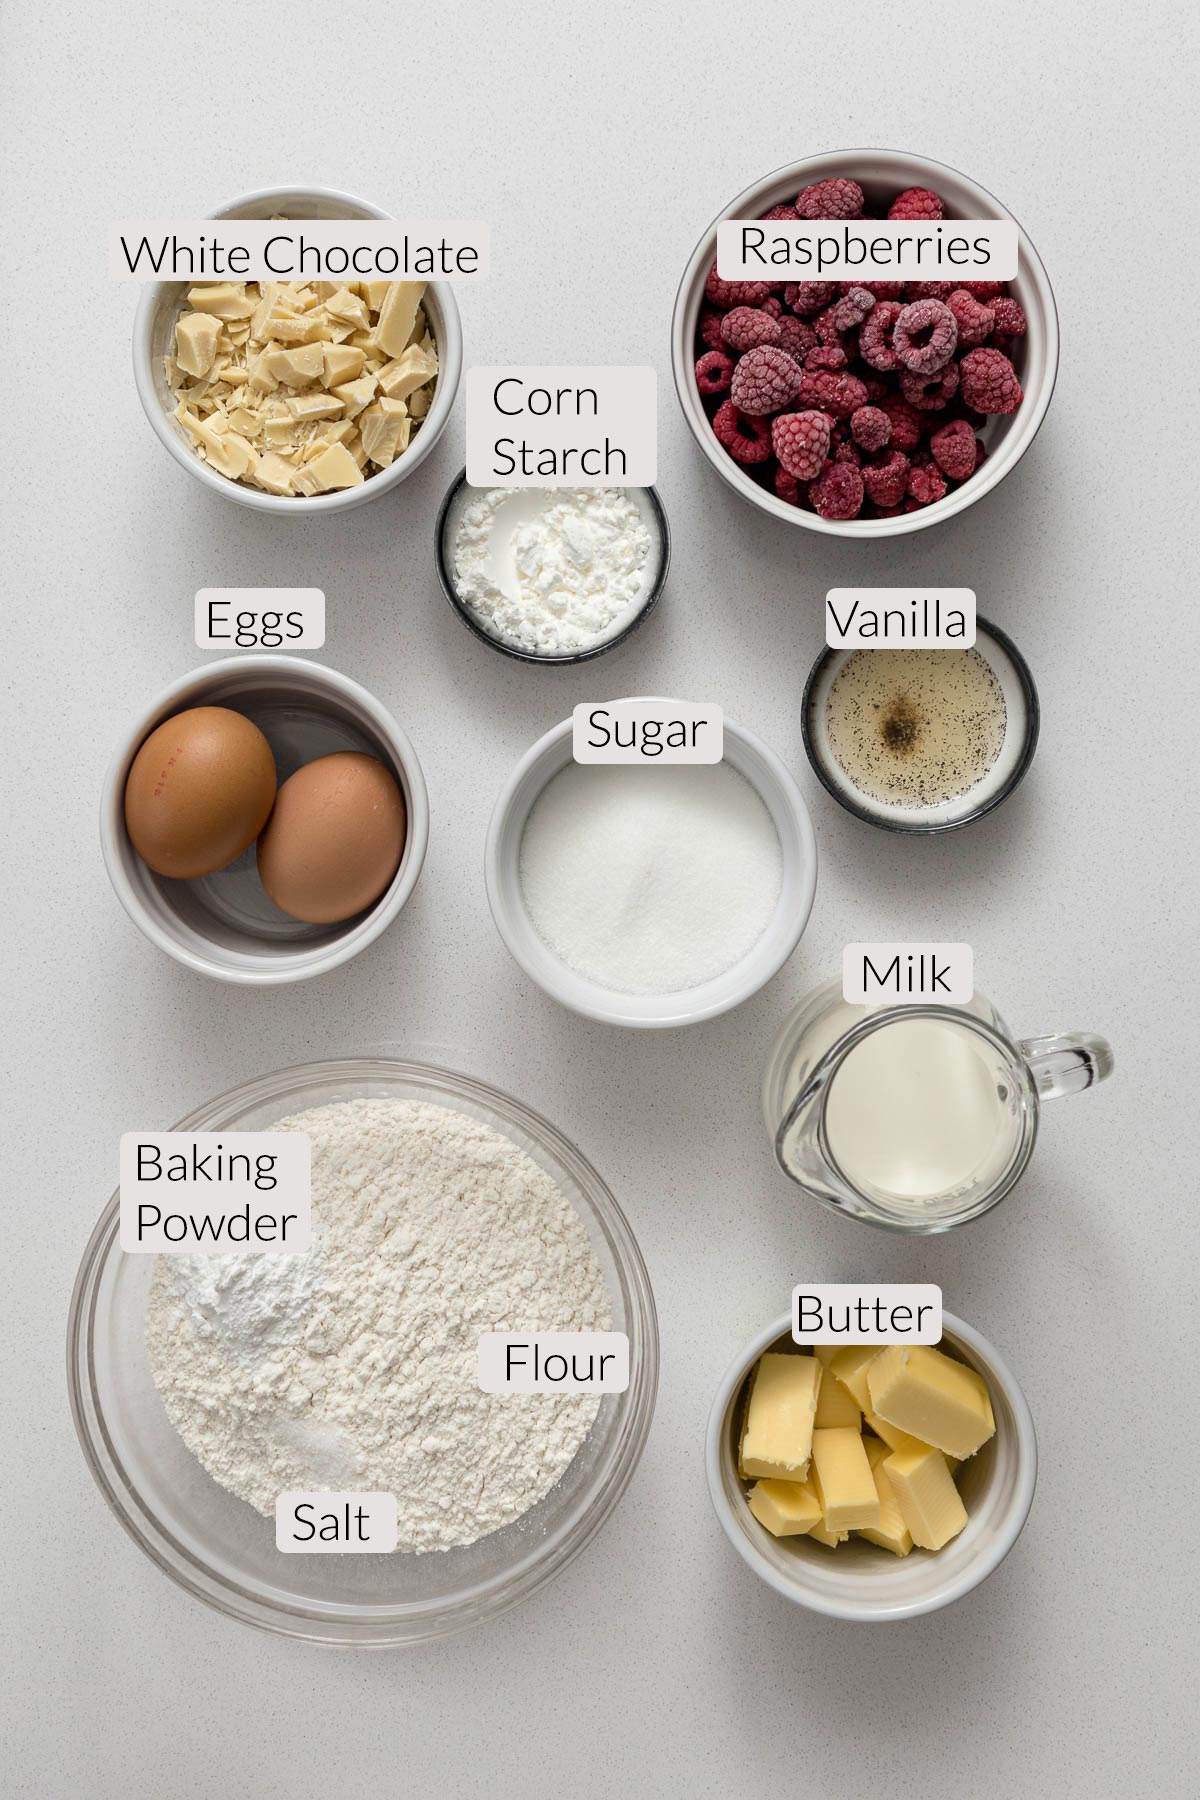 Raspberry and white chocolate loaf cake ingredients.